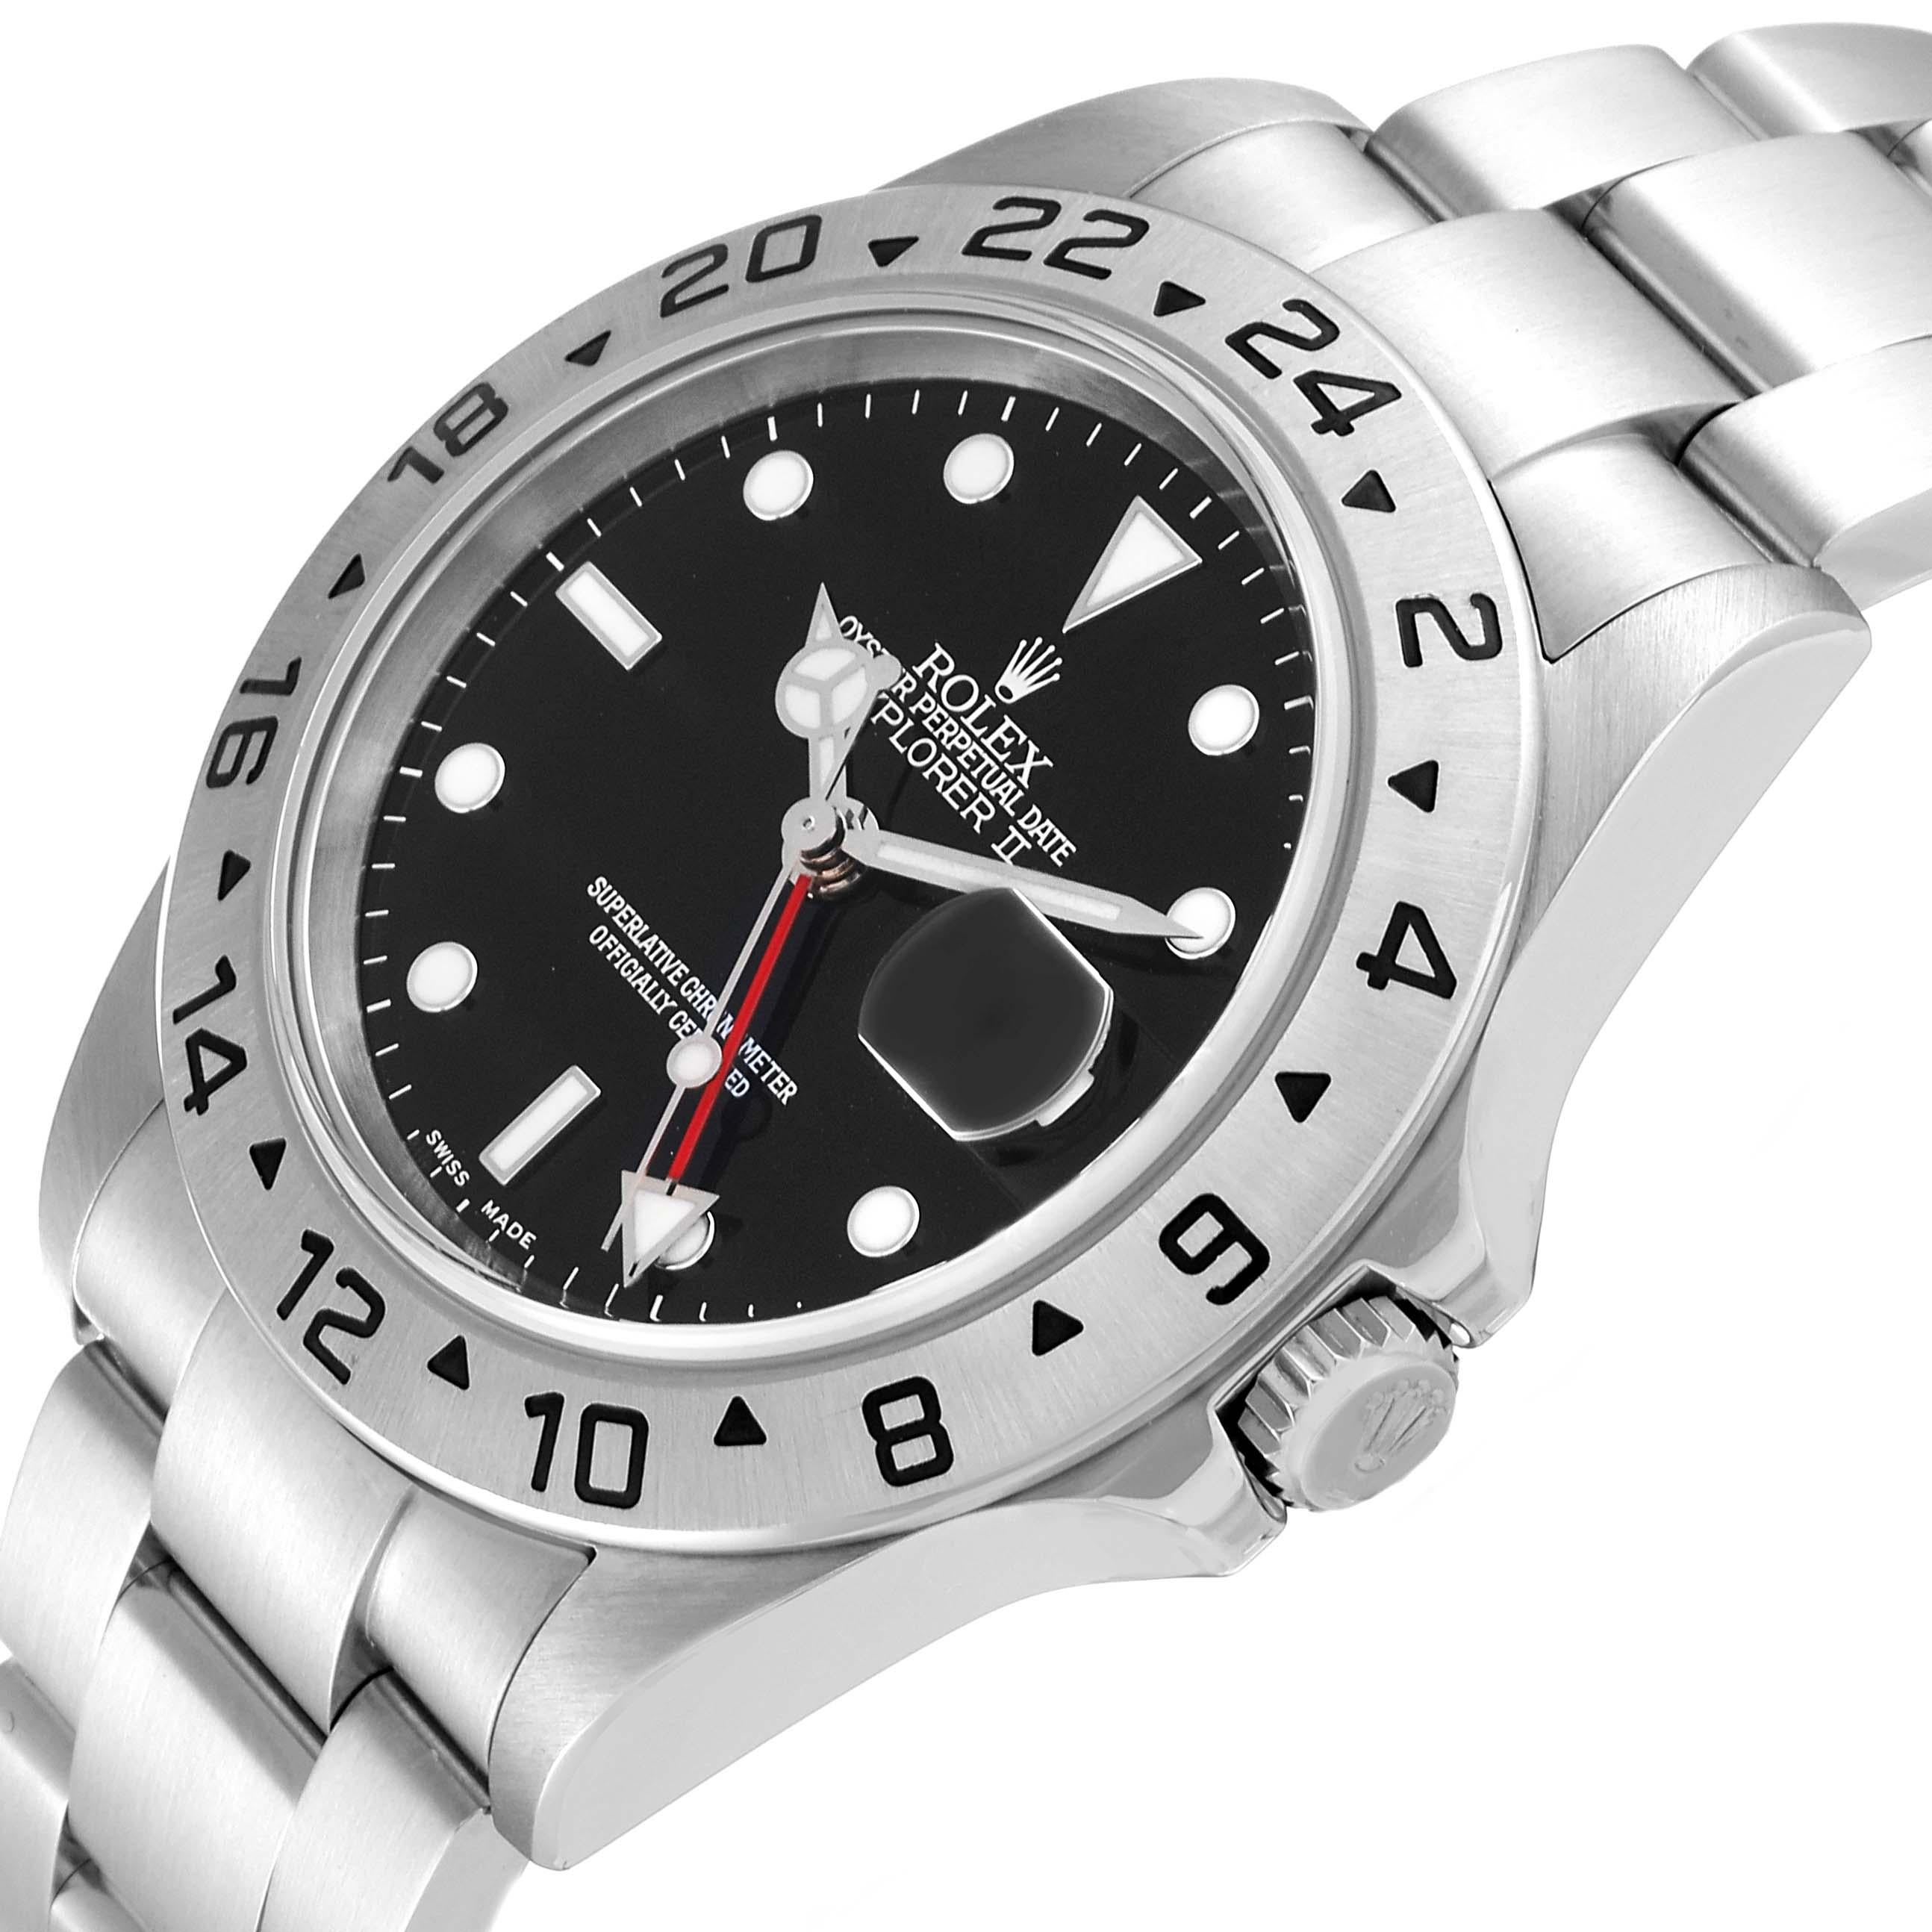 Rolex Explorer II Black Dial Steel Mens Watch 16570 Box Papers. Officially certified chronometer automatic self-winding movement. Stainless steel case 40 mm in diameter. Rolex logo on the crown. Stainless steel bezel with 24-hour scale. Scratch